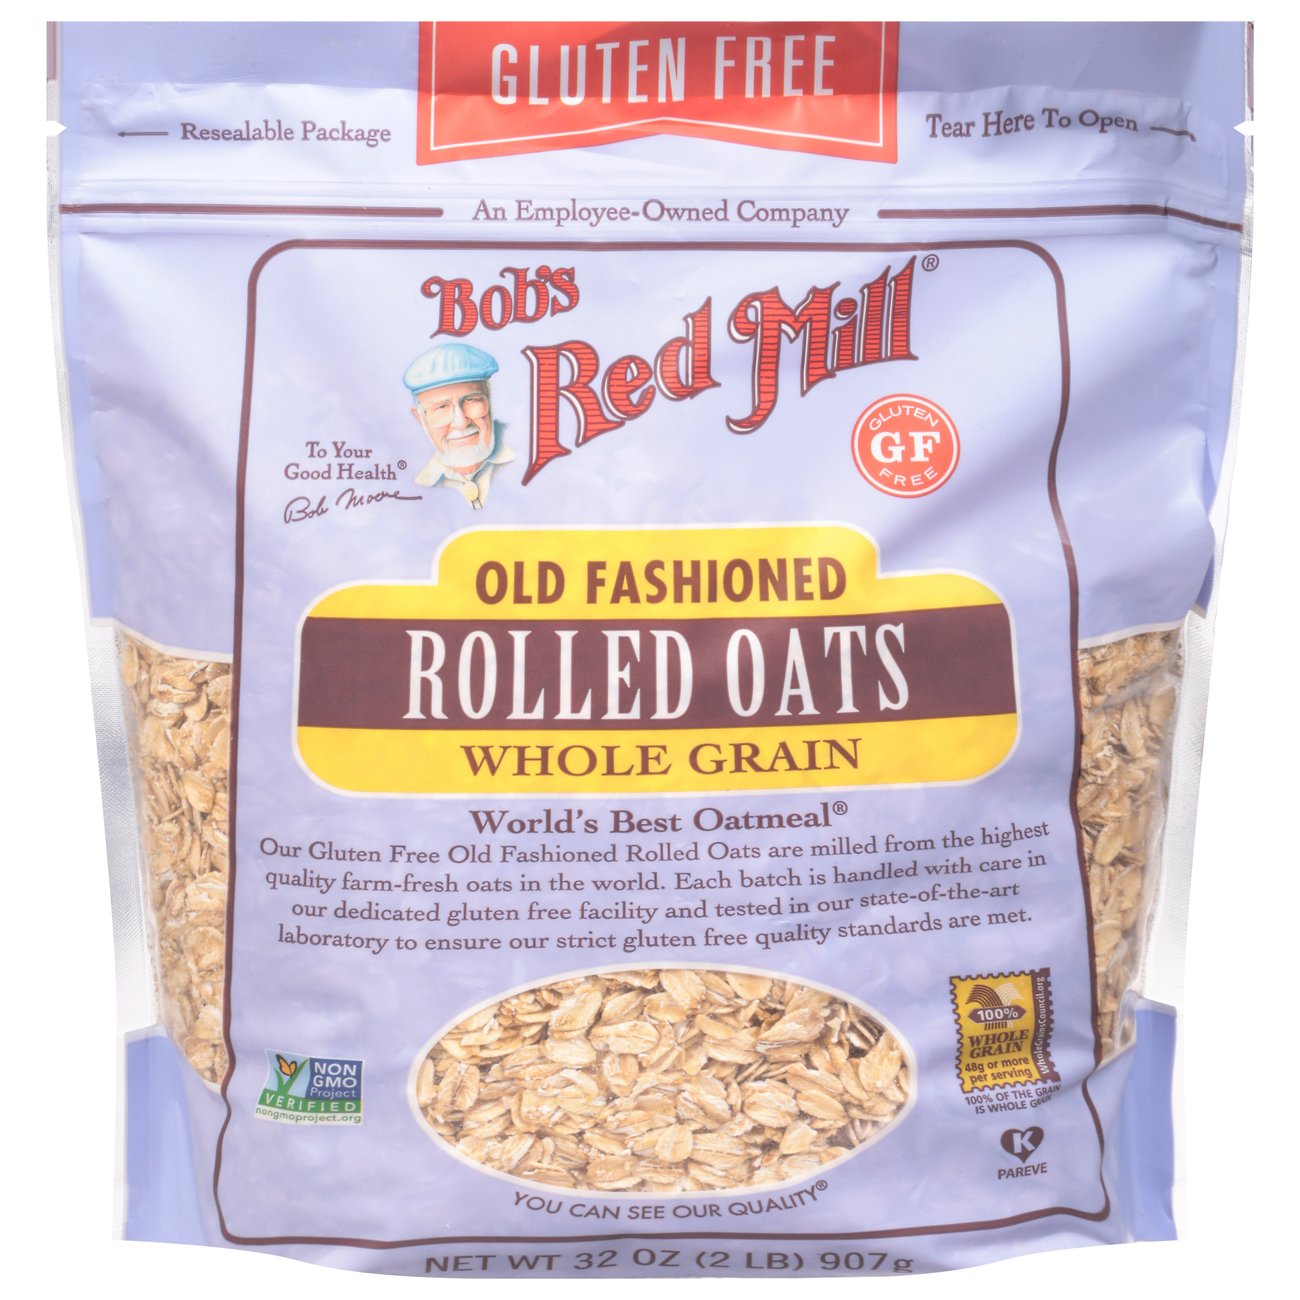 Bobs Red Mill Gluten Free Old Fashioned Rolled Oats Shop Oatmeal